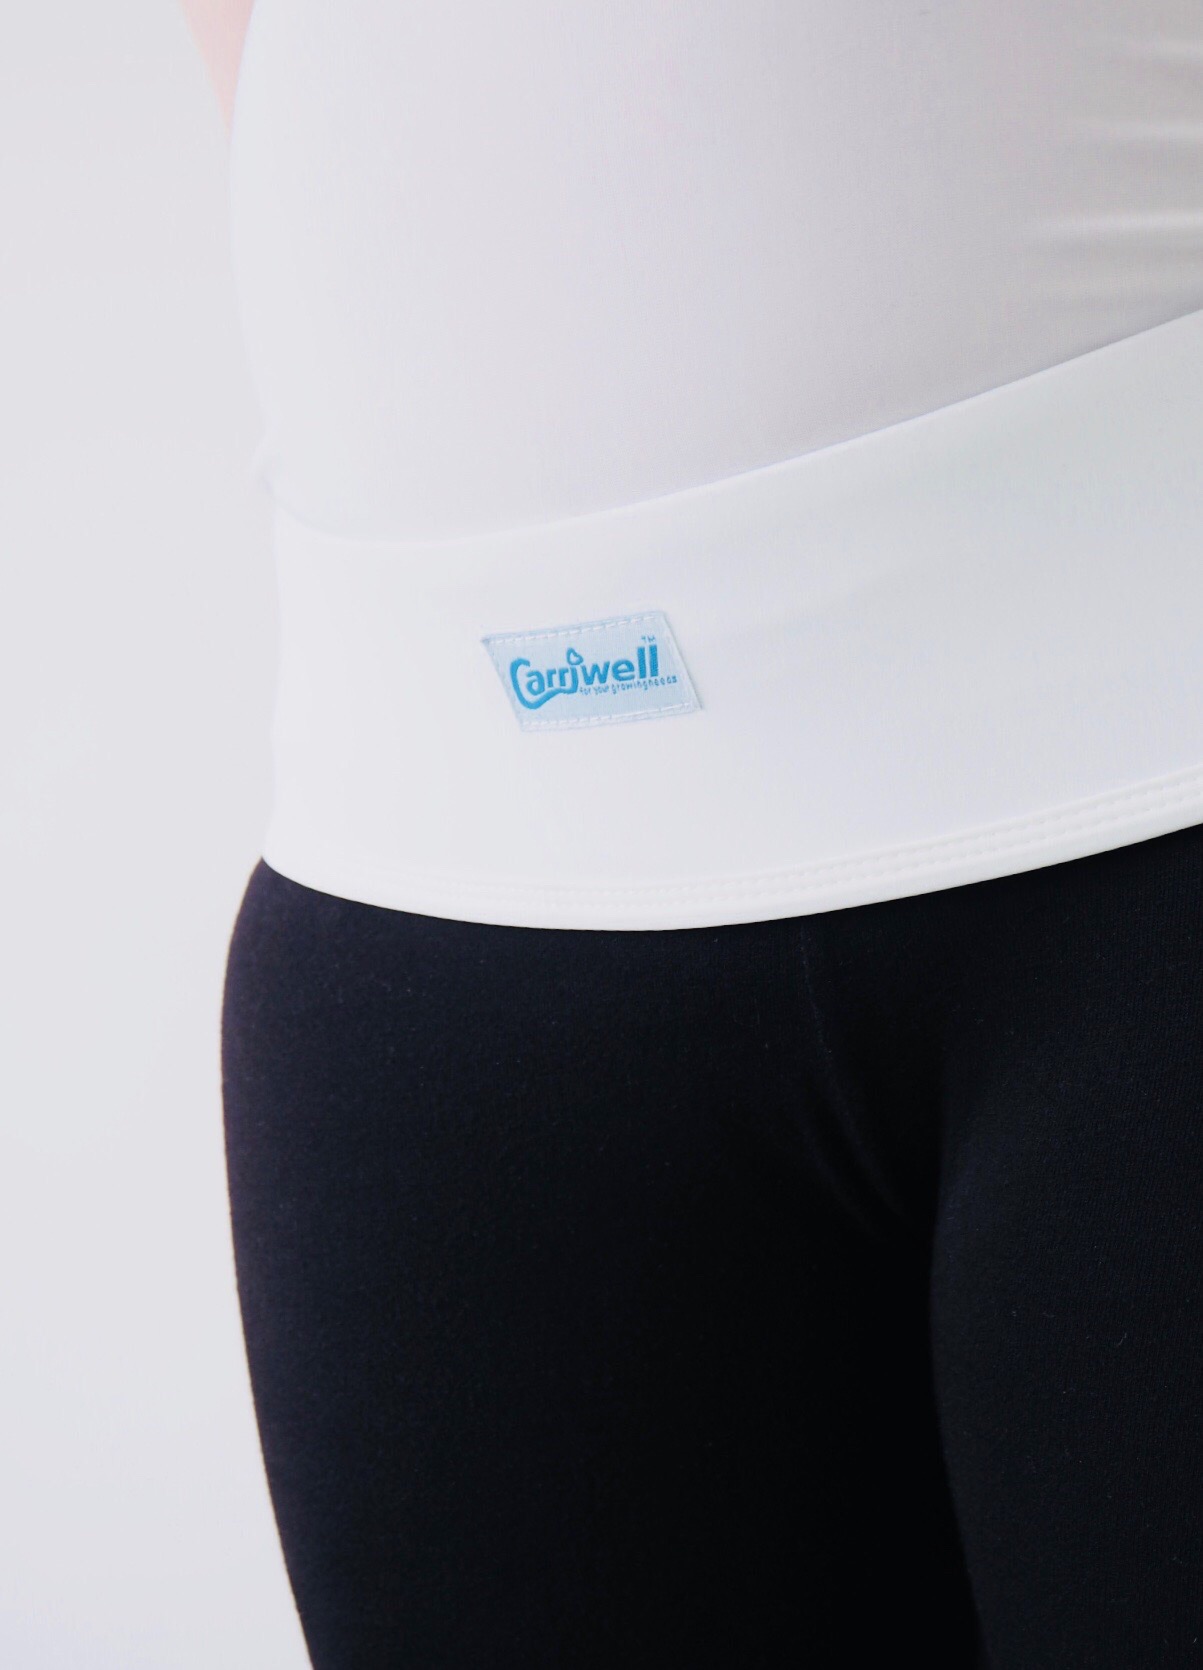 Pregnancy back pain Carriwell overbelly support belt